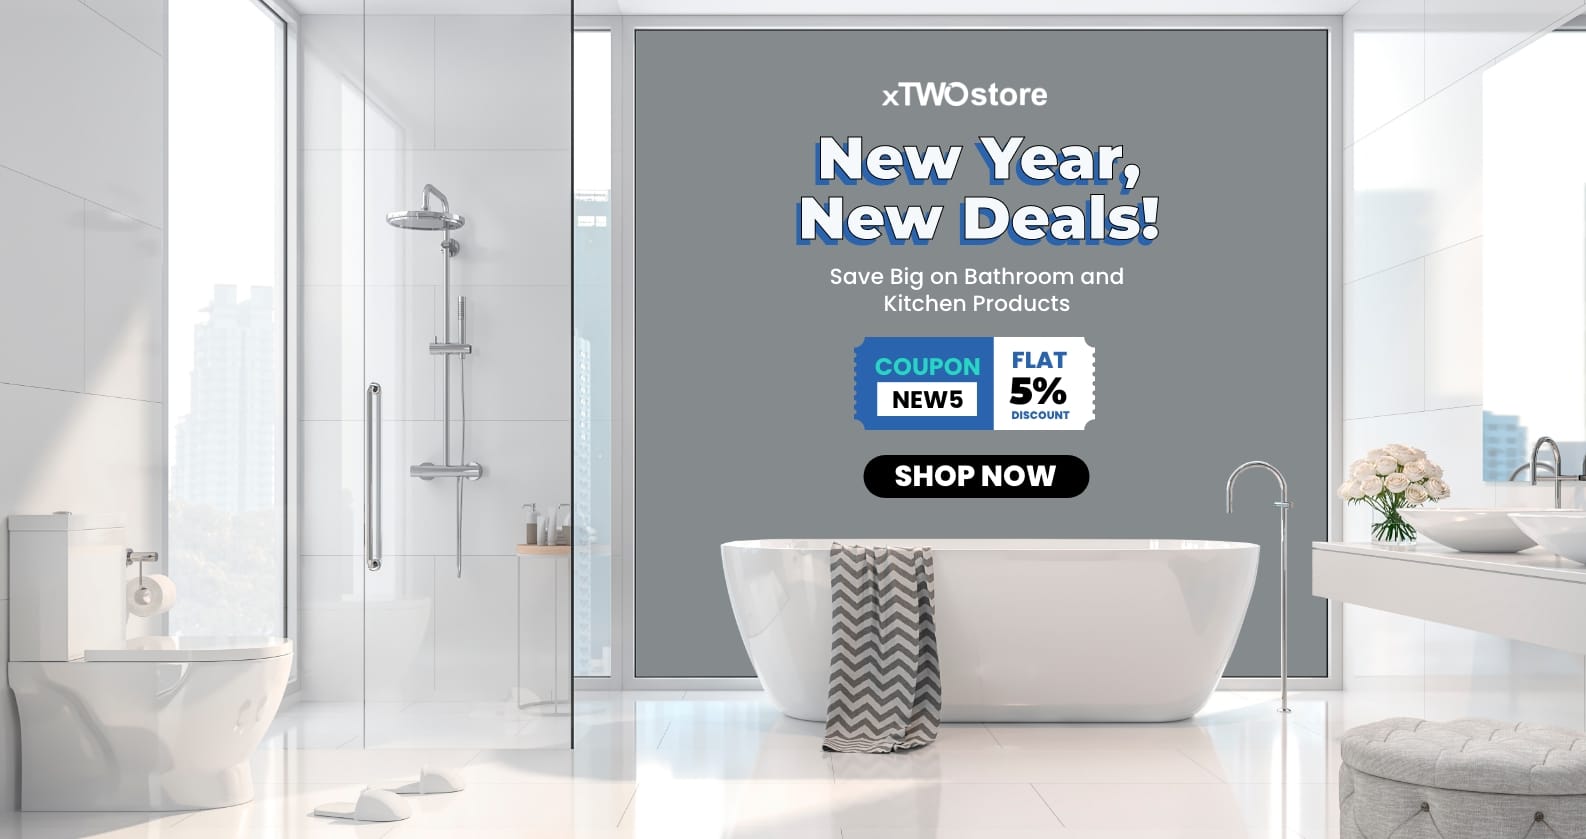  New Year New Deals at xTWOstore